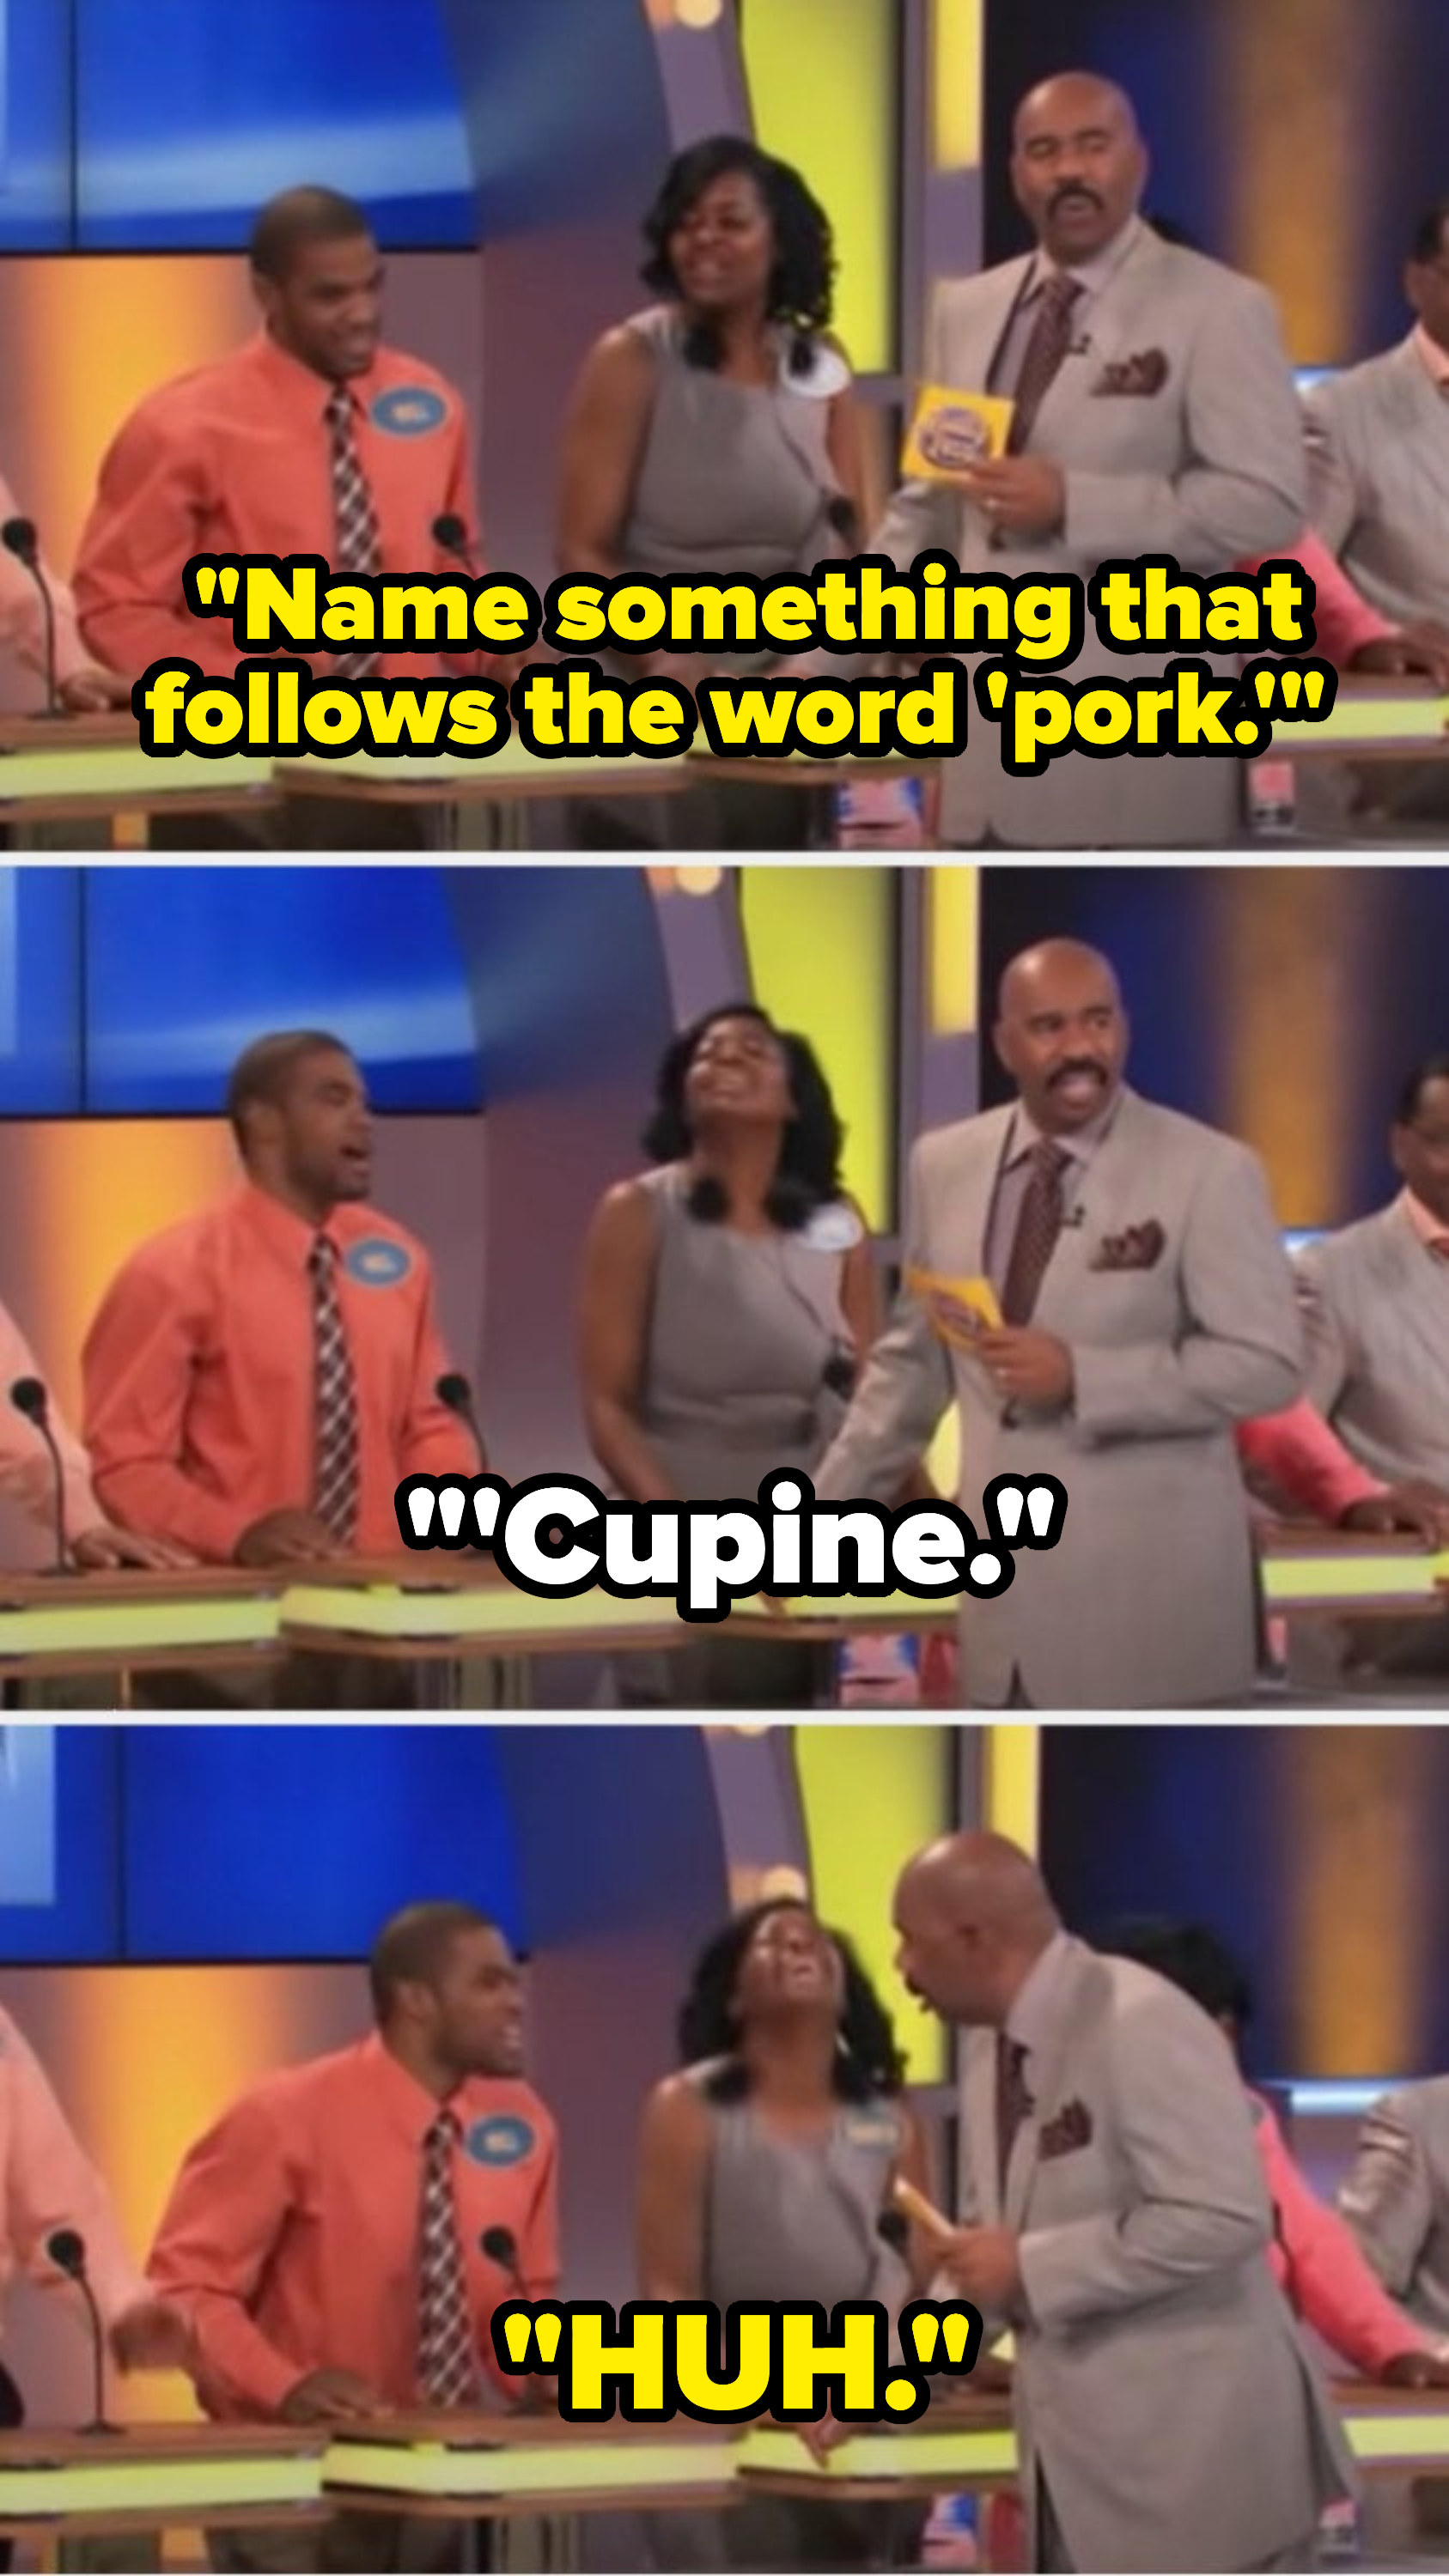 Steve says, &quot;Name something that follows the word ‘pork,’&quot; and a contestant says, &quot;&#x27;Cupine,&quot; making Steve go, &quot;Huh&quot;